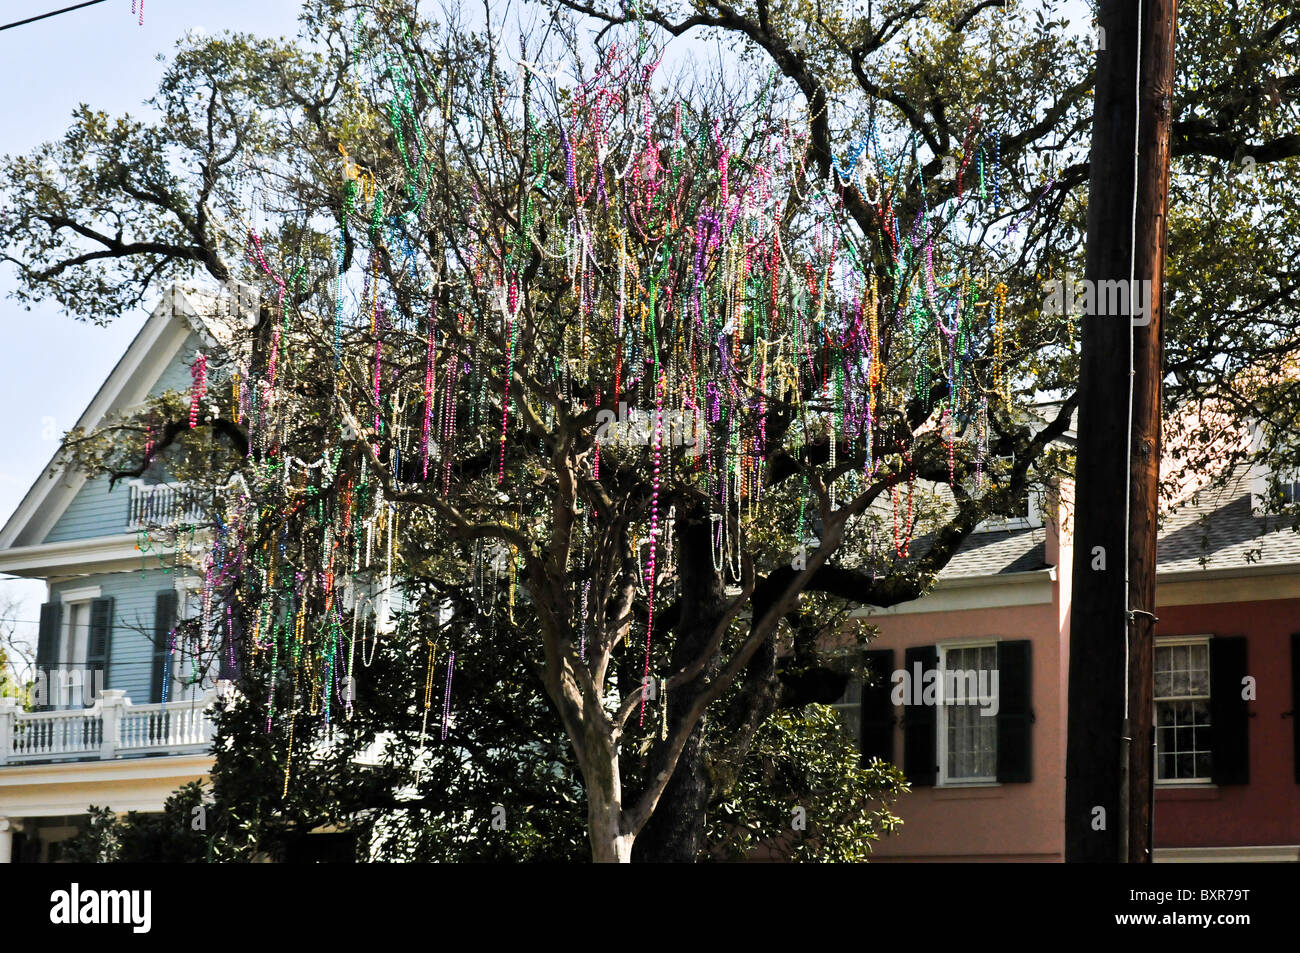 File:20080622 St. Charles St. Trolley behind tree with Mardi Gras beads.JPG  - Wikipedia